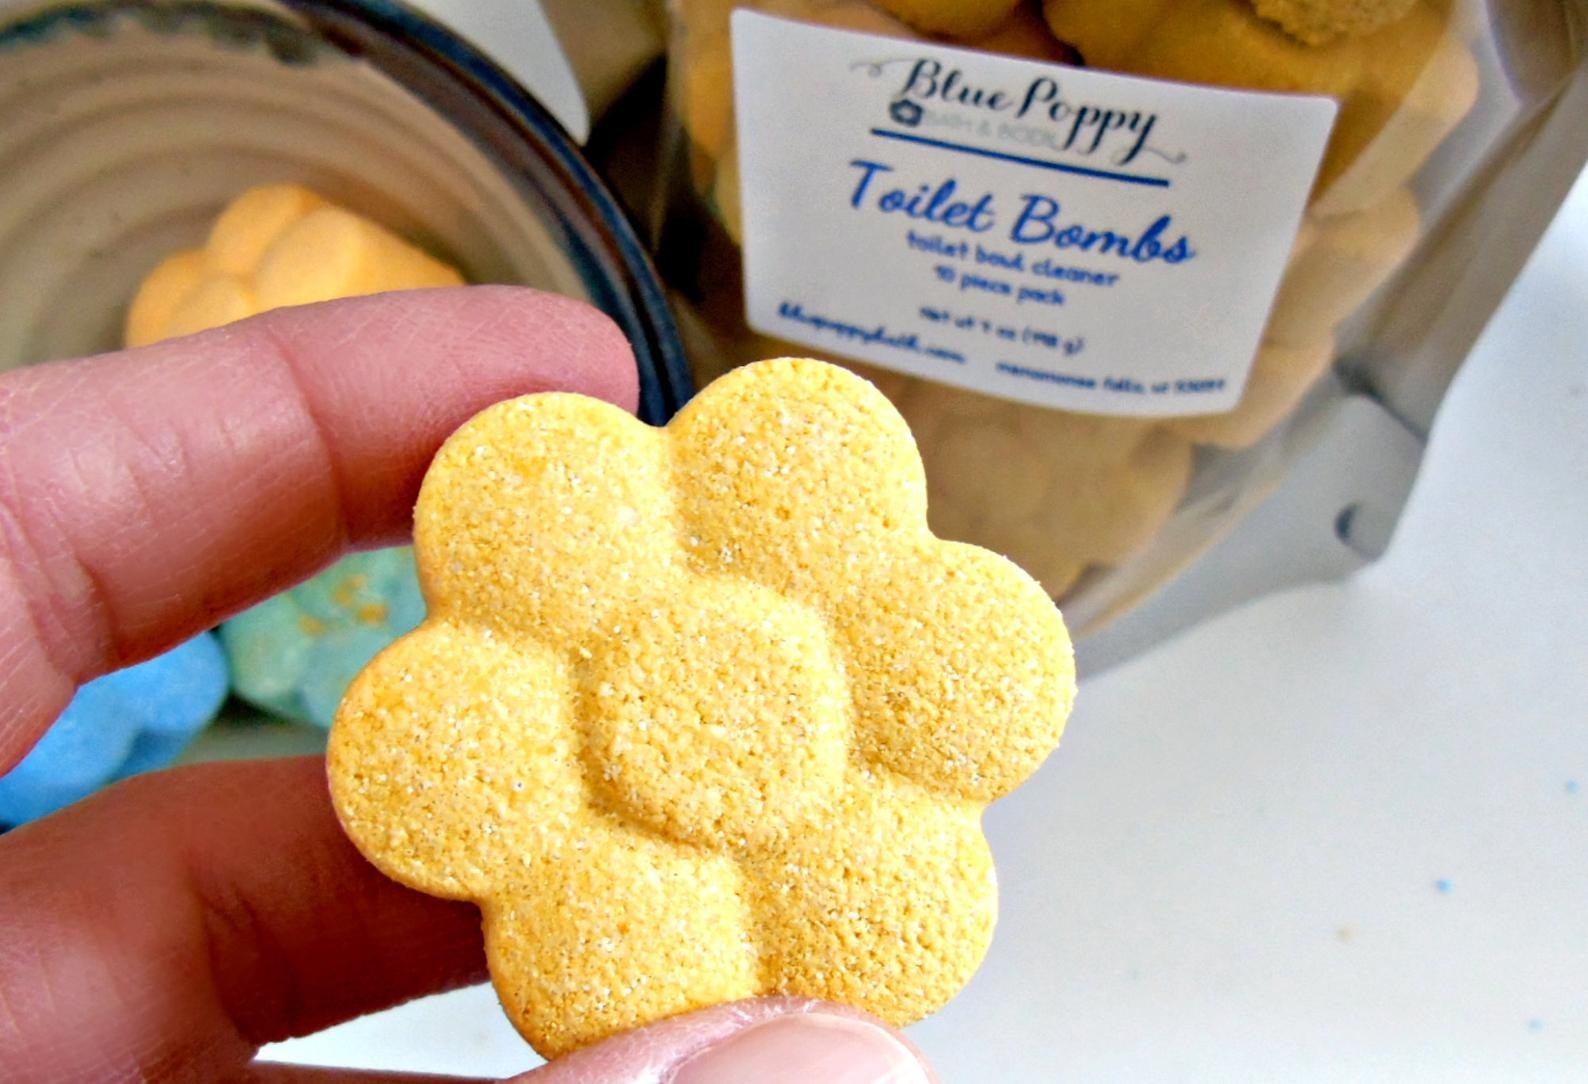 Yellow flower-shaped tablet